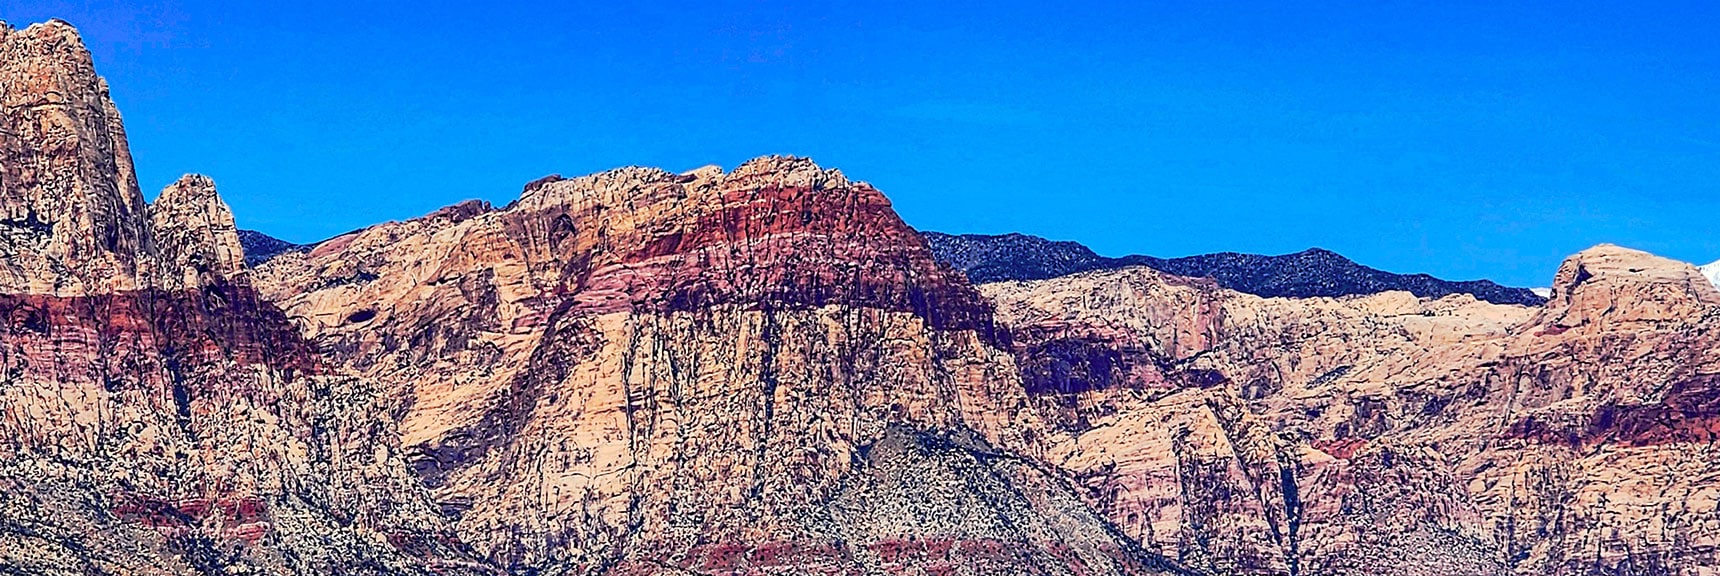 Next Mts. South: Juniper Peak Hiding to Right of Larger Rainbow Mt. | Blue Diamond Hill Southern Ridgelines | Red Rock Canyon, Nevada